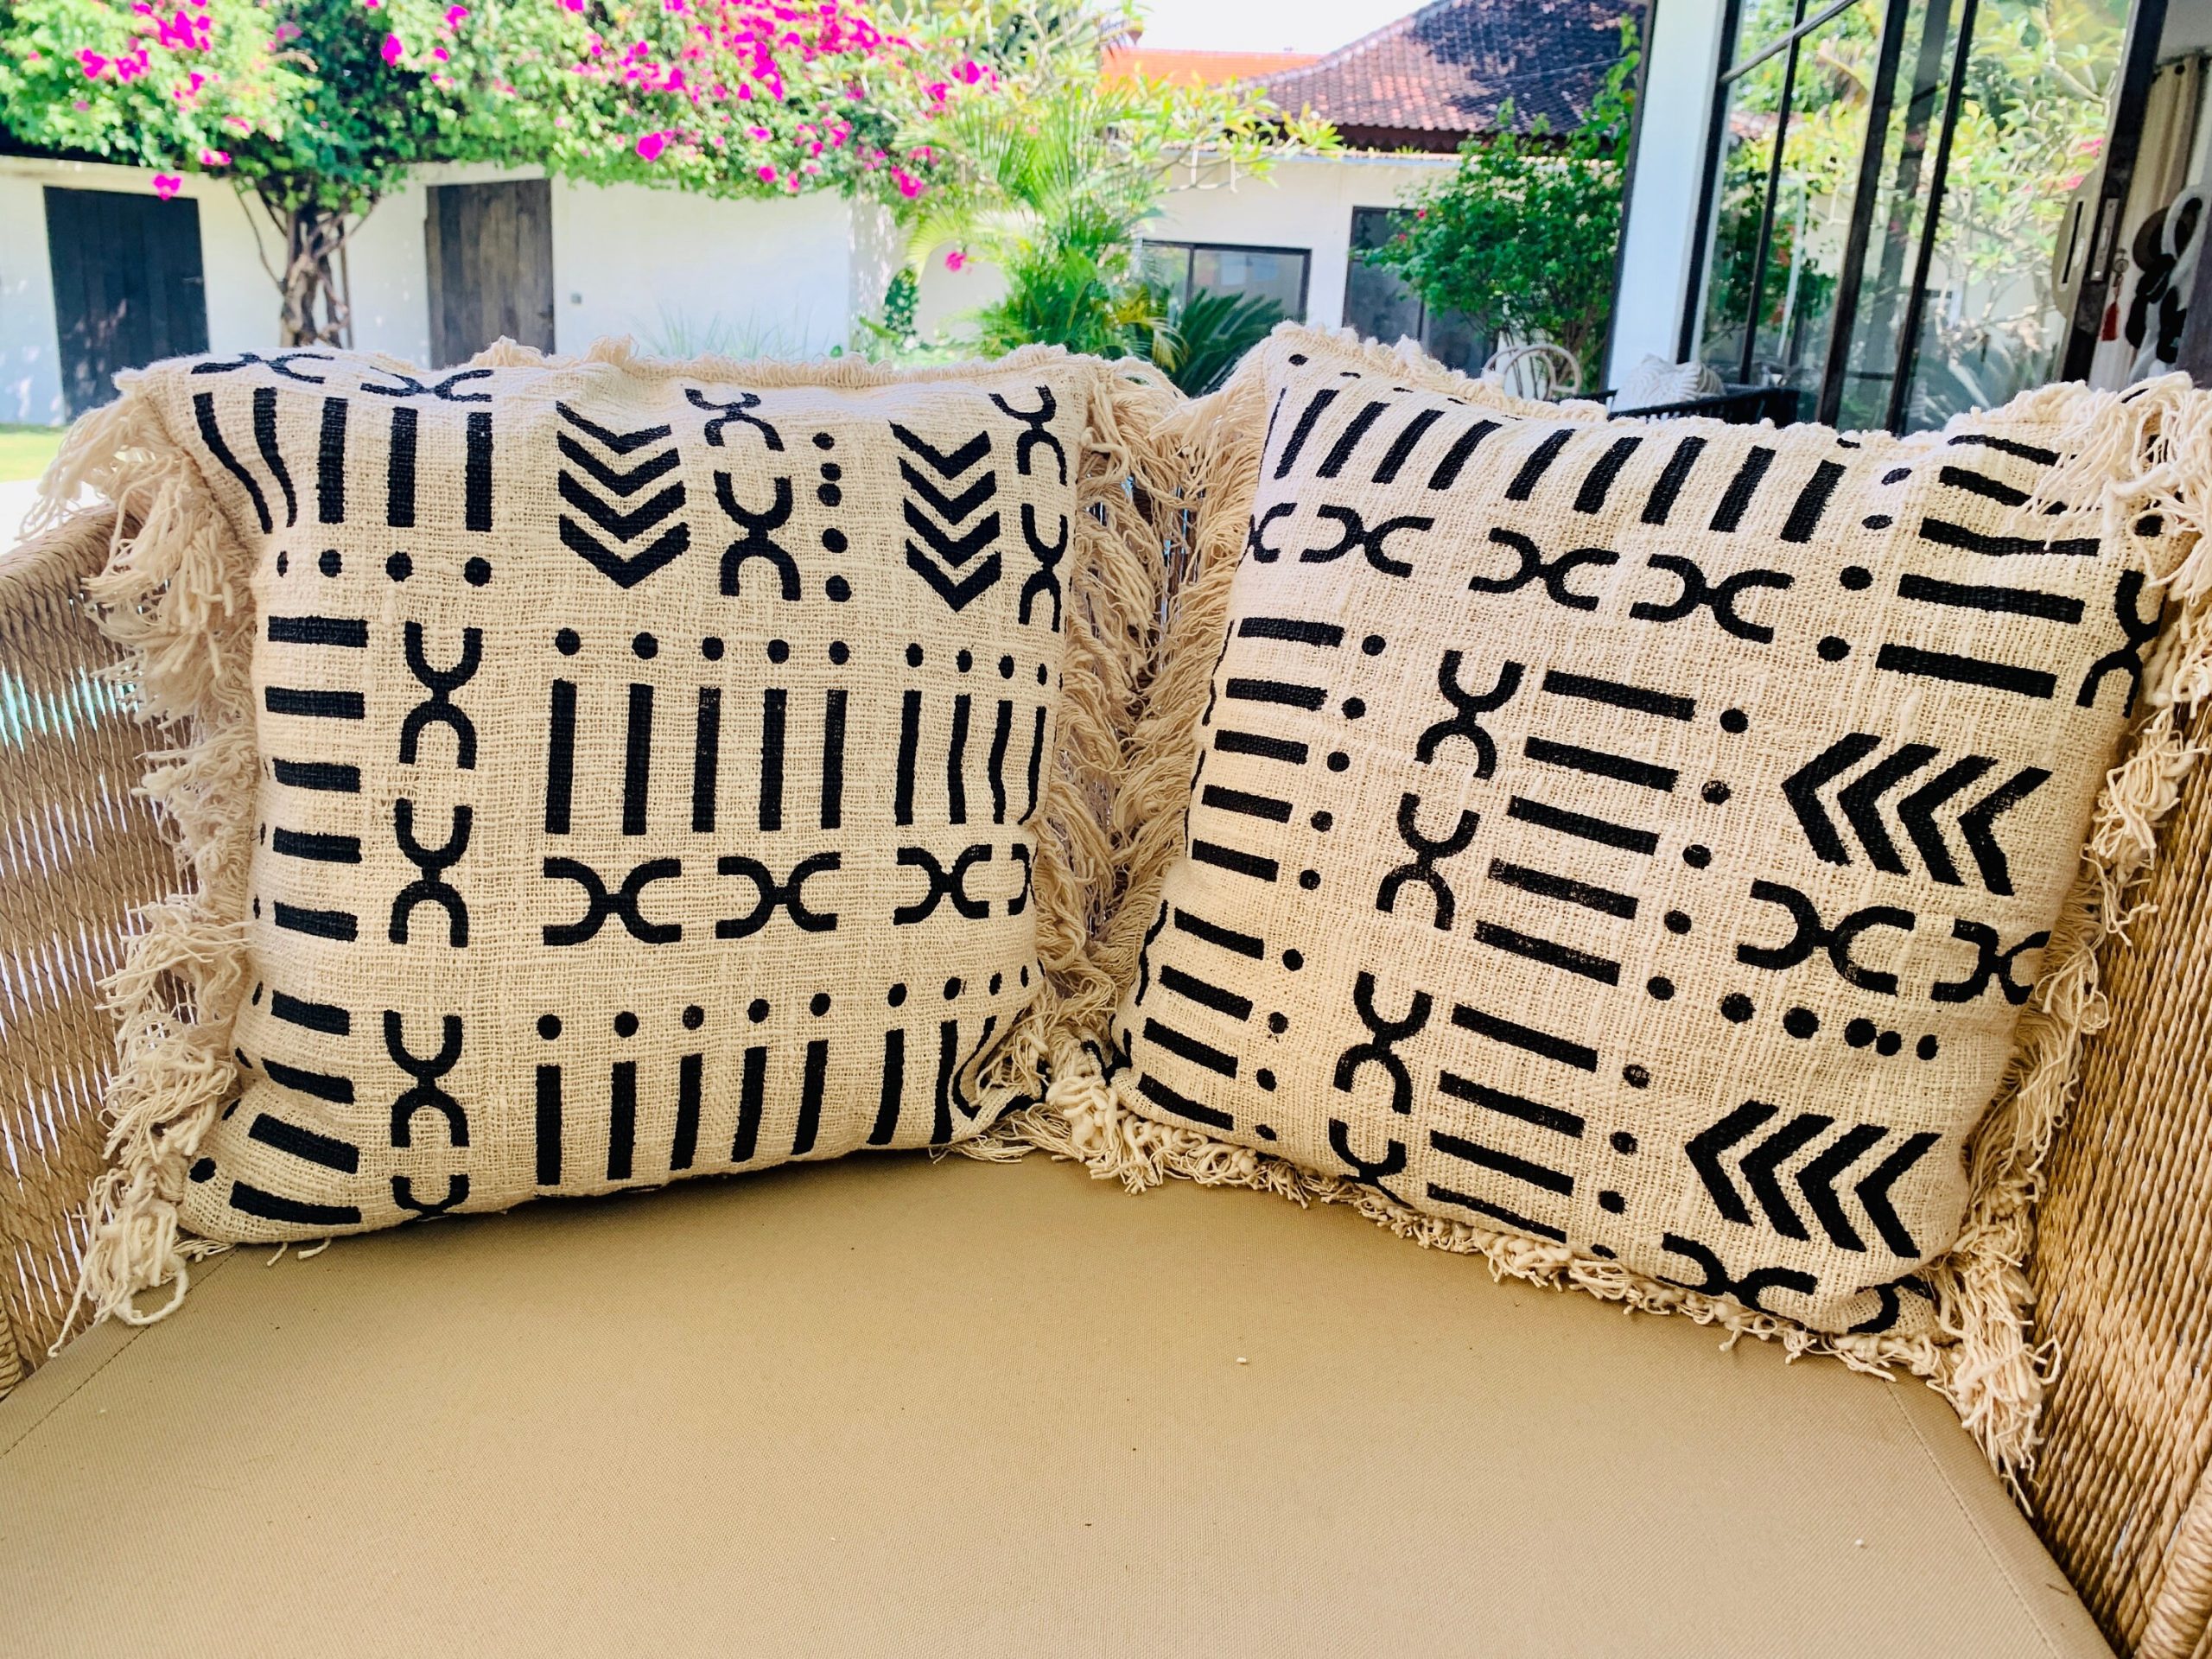 Incredible Pillows Bali Indonesia References